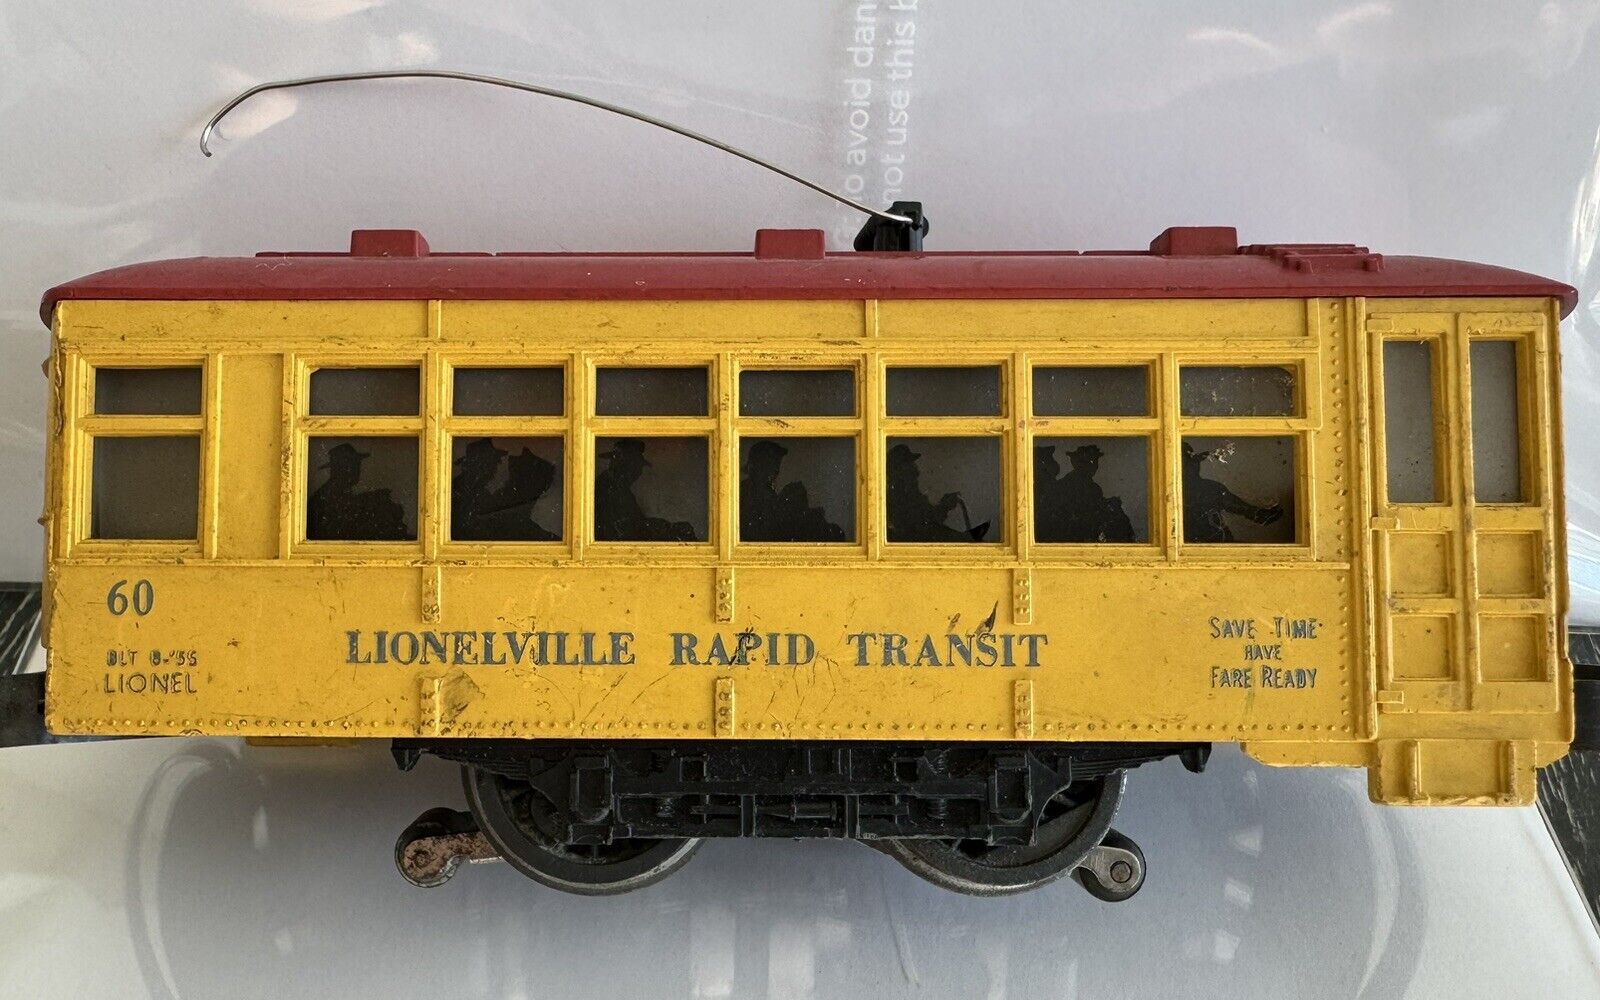 The Lionel Trolley No. 60